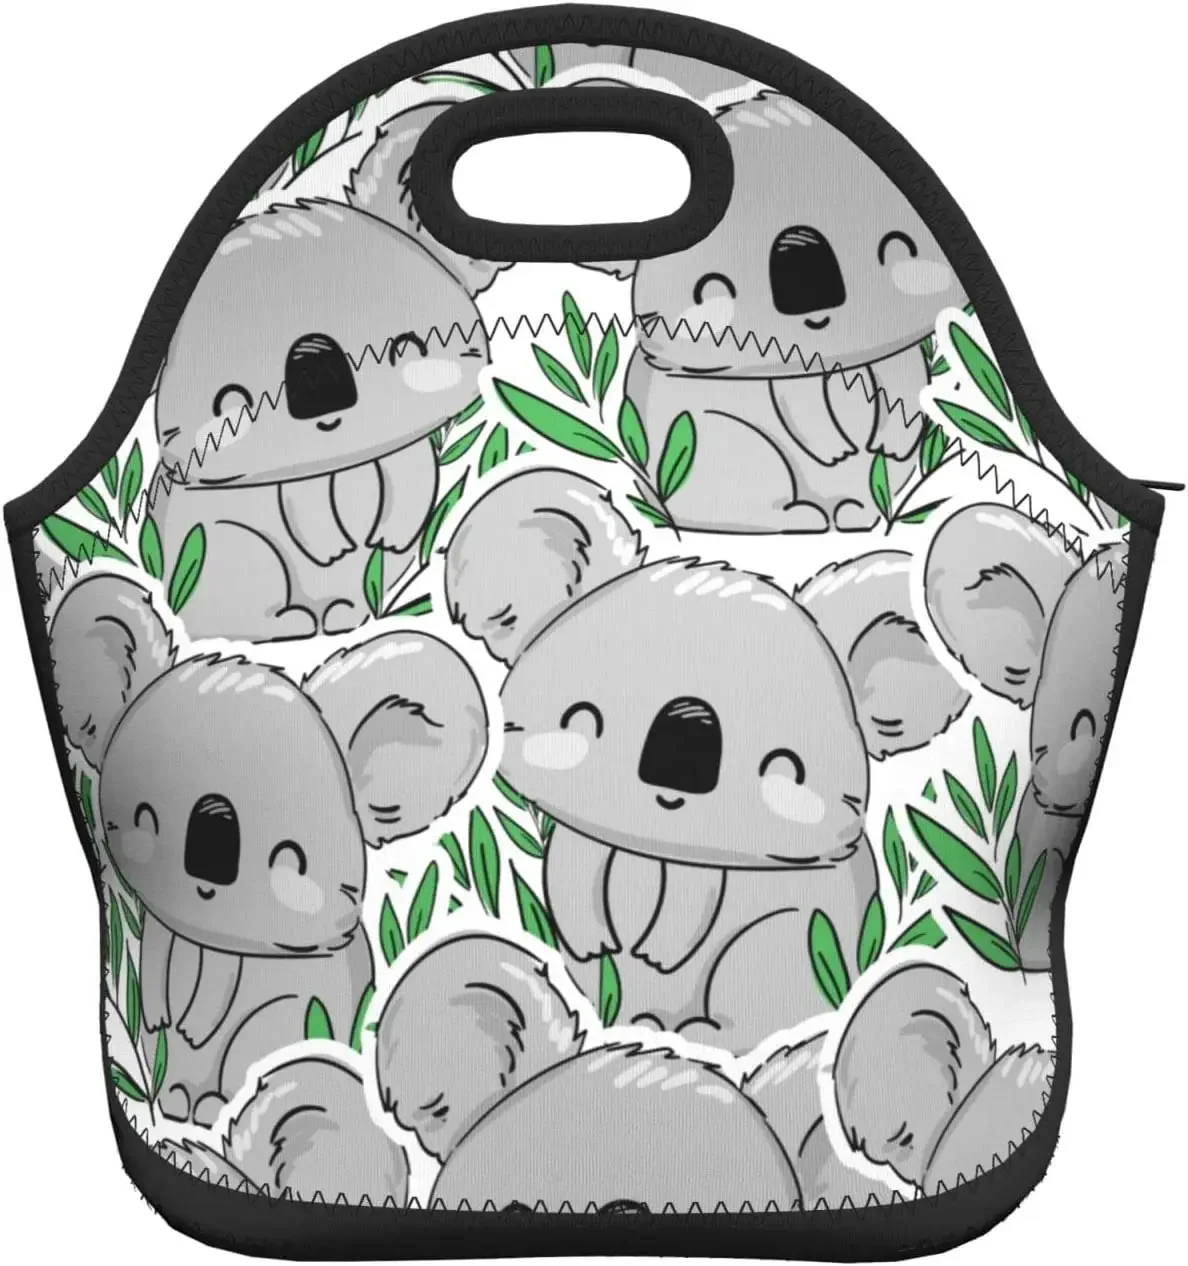 

Retro Lunch Bag Koala And Leaves Neoprene Lunch Bag Insulated Lunch Box Tote For Adult /Kids /Travel/Picnic/Work